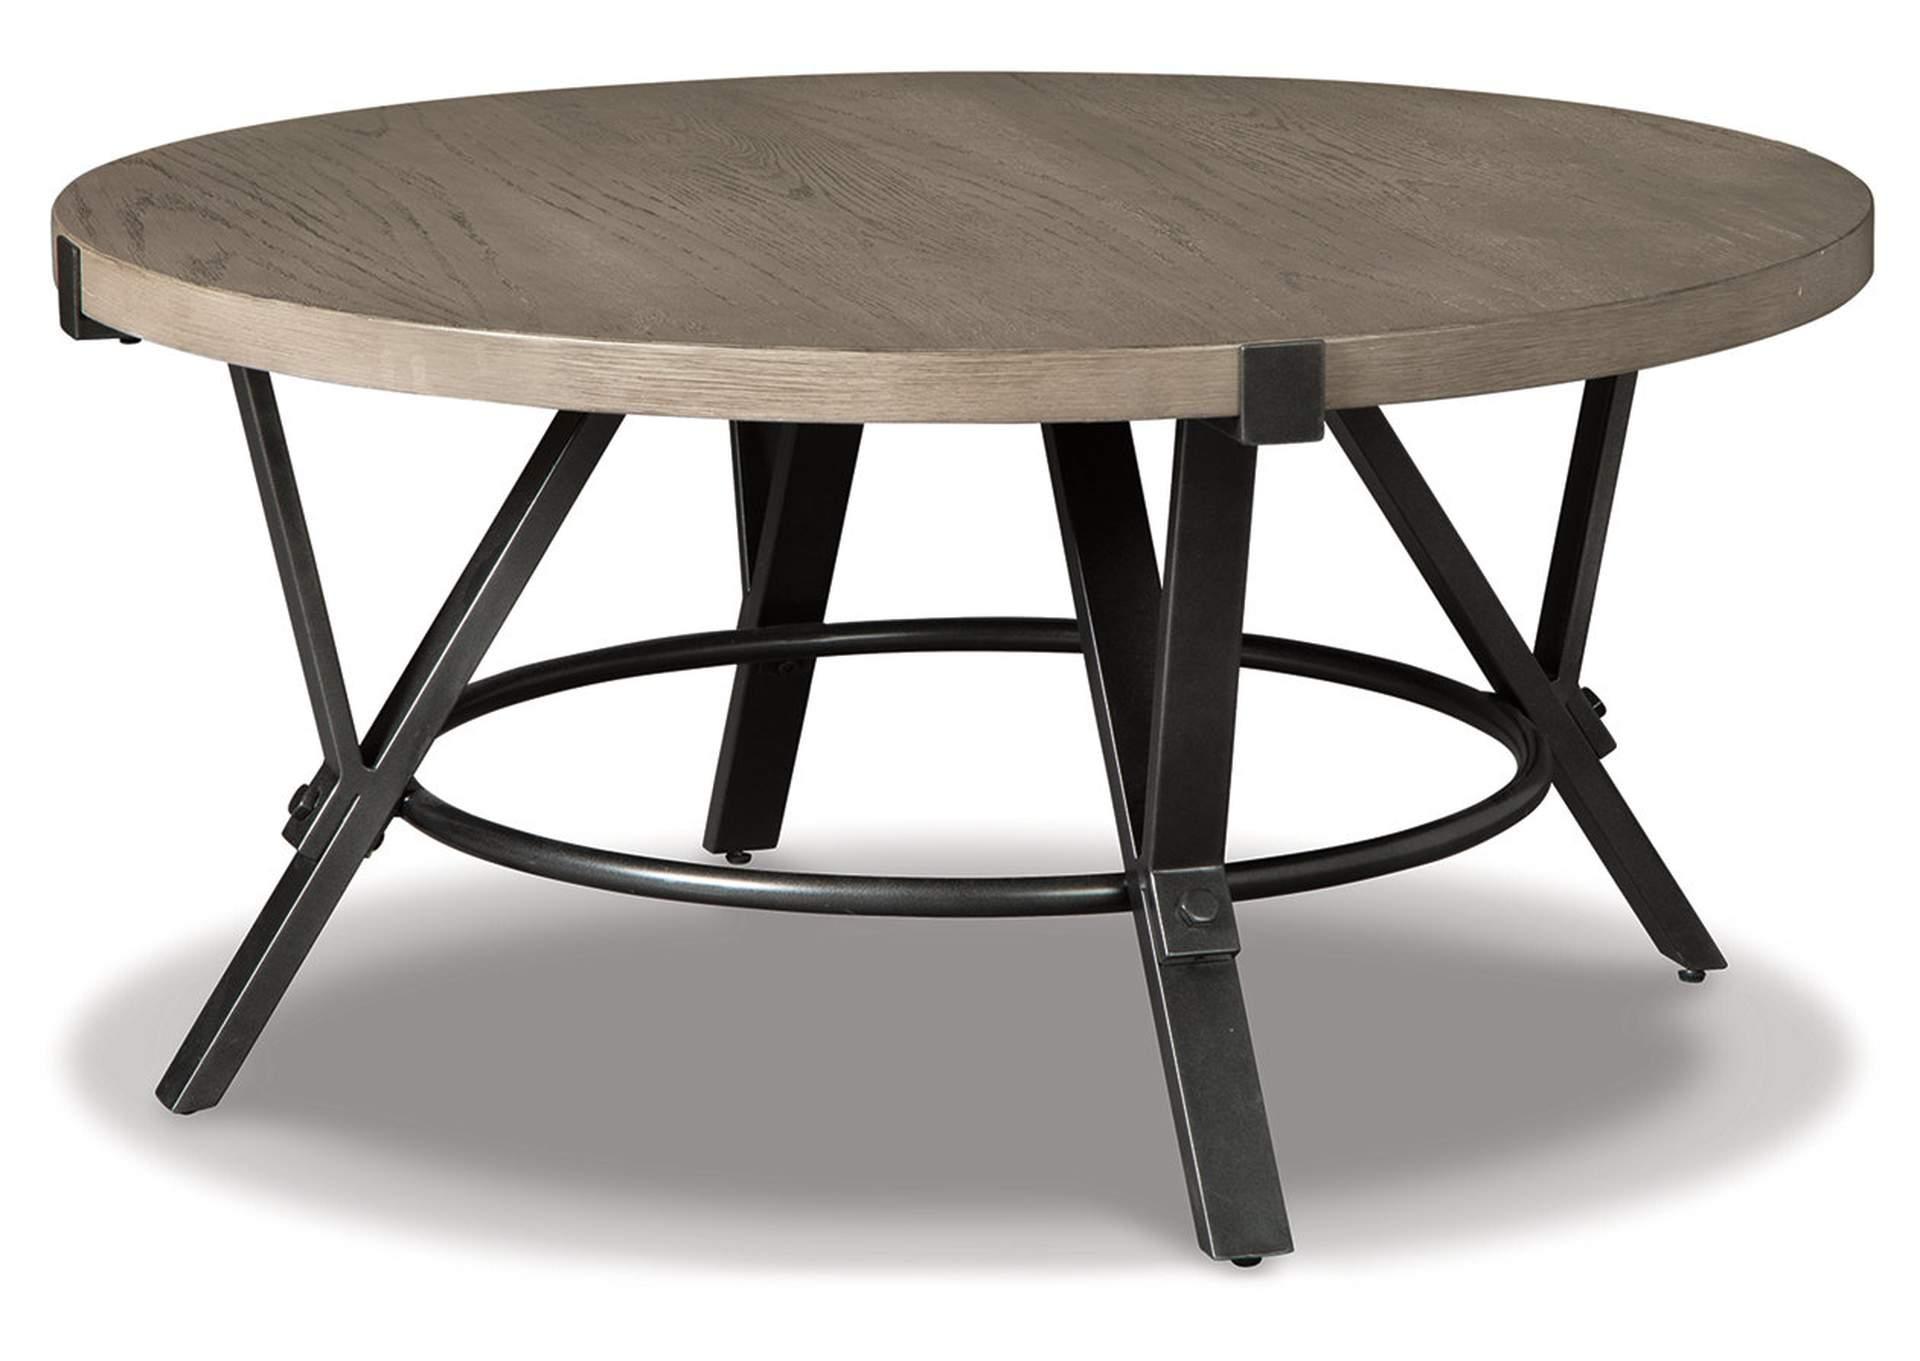 Zontini Coffee Table,In Store